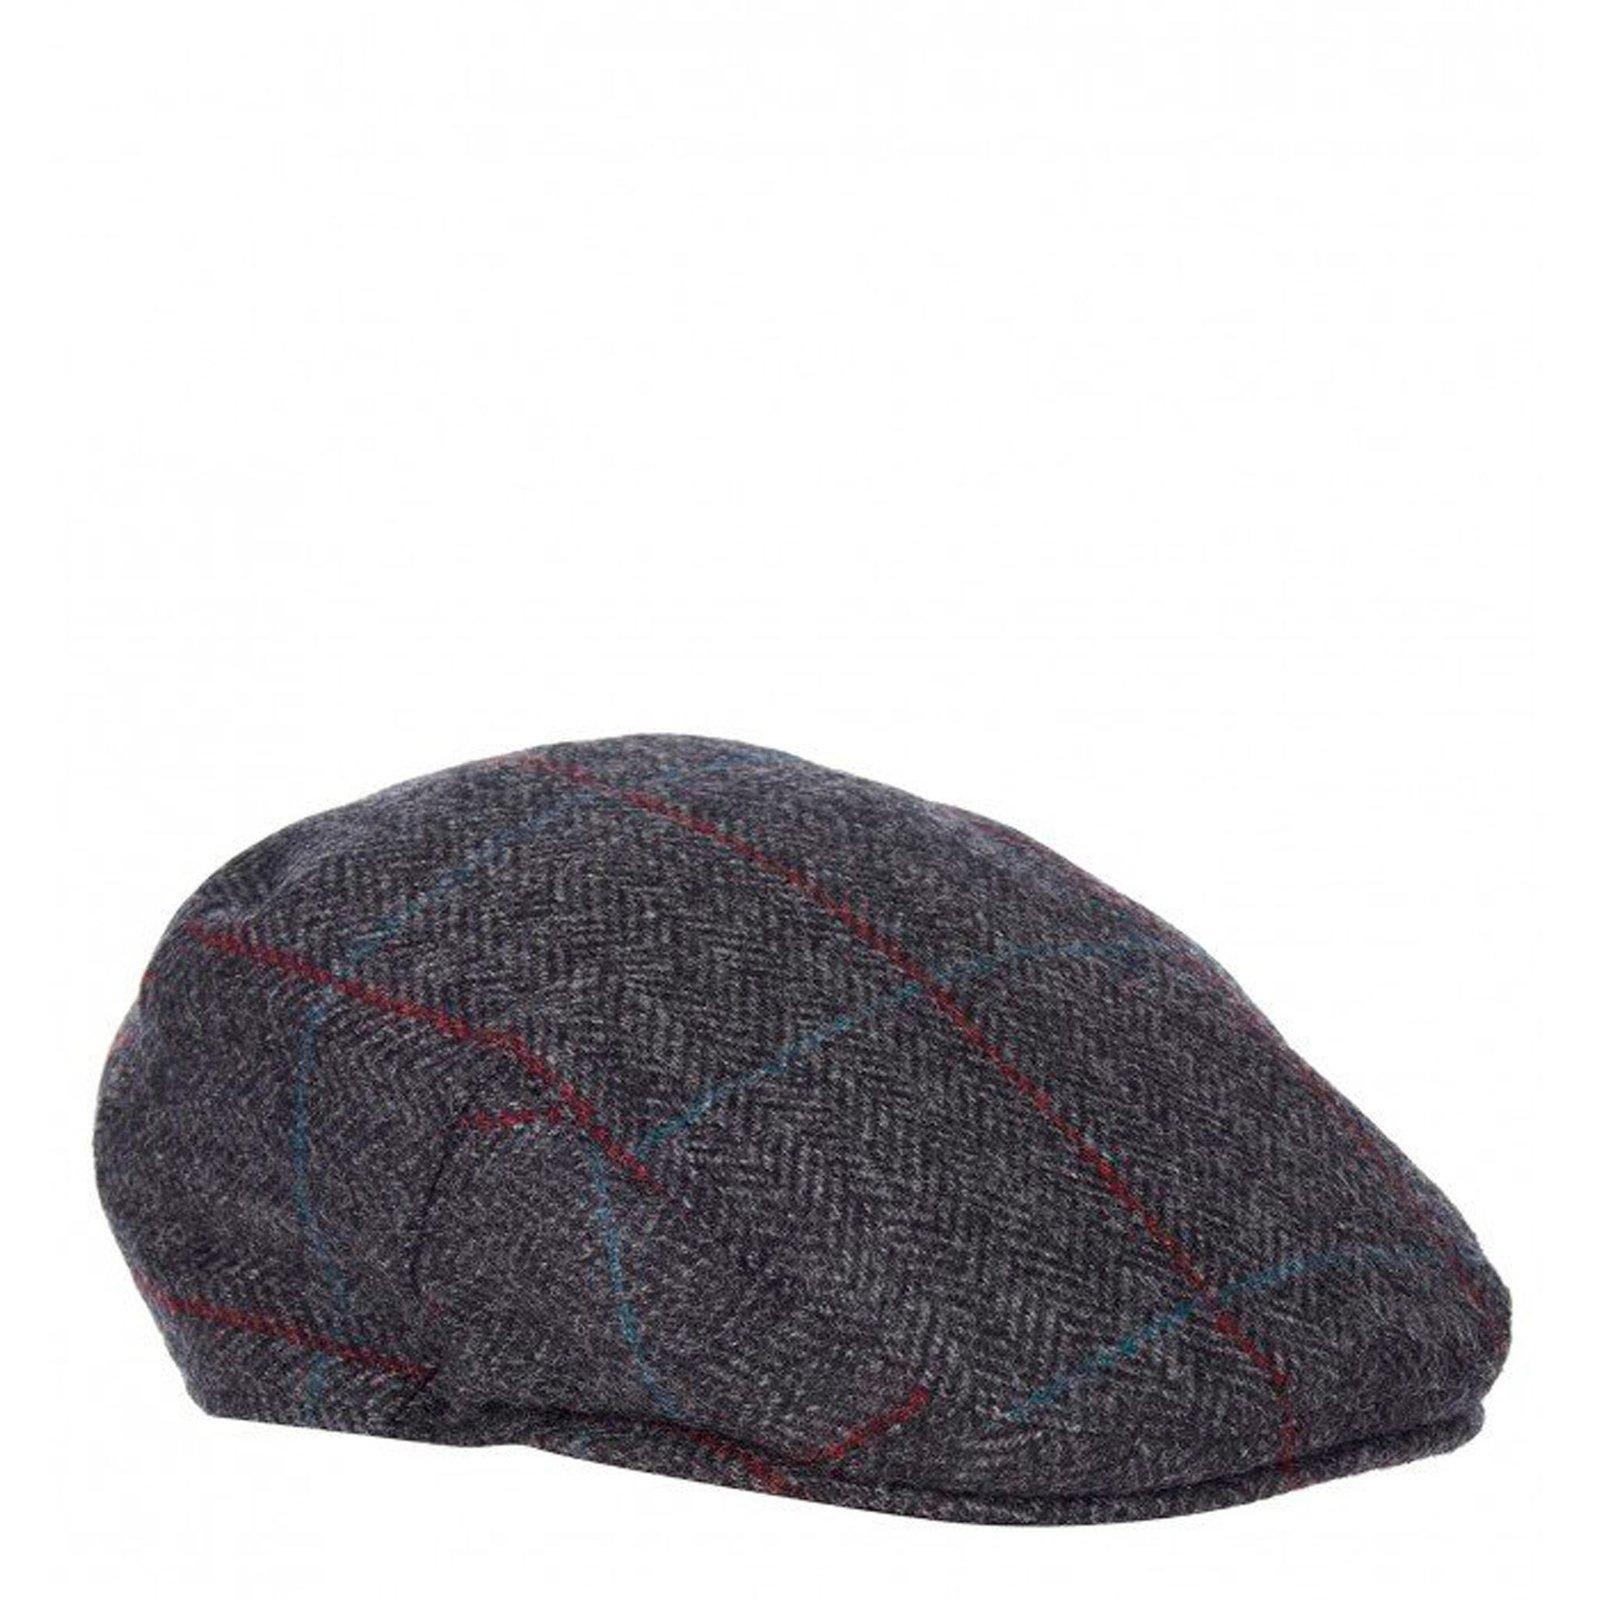 Barbour Crieff Flat Cap In Charcoal/red/blue